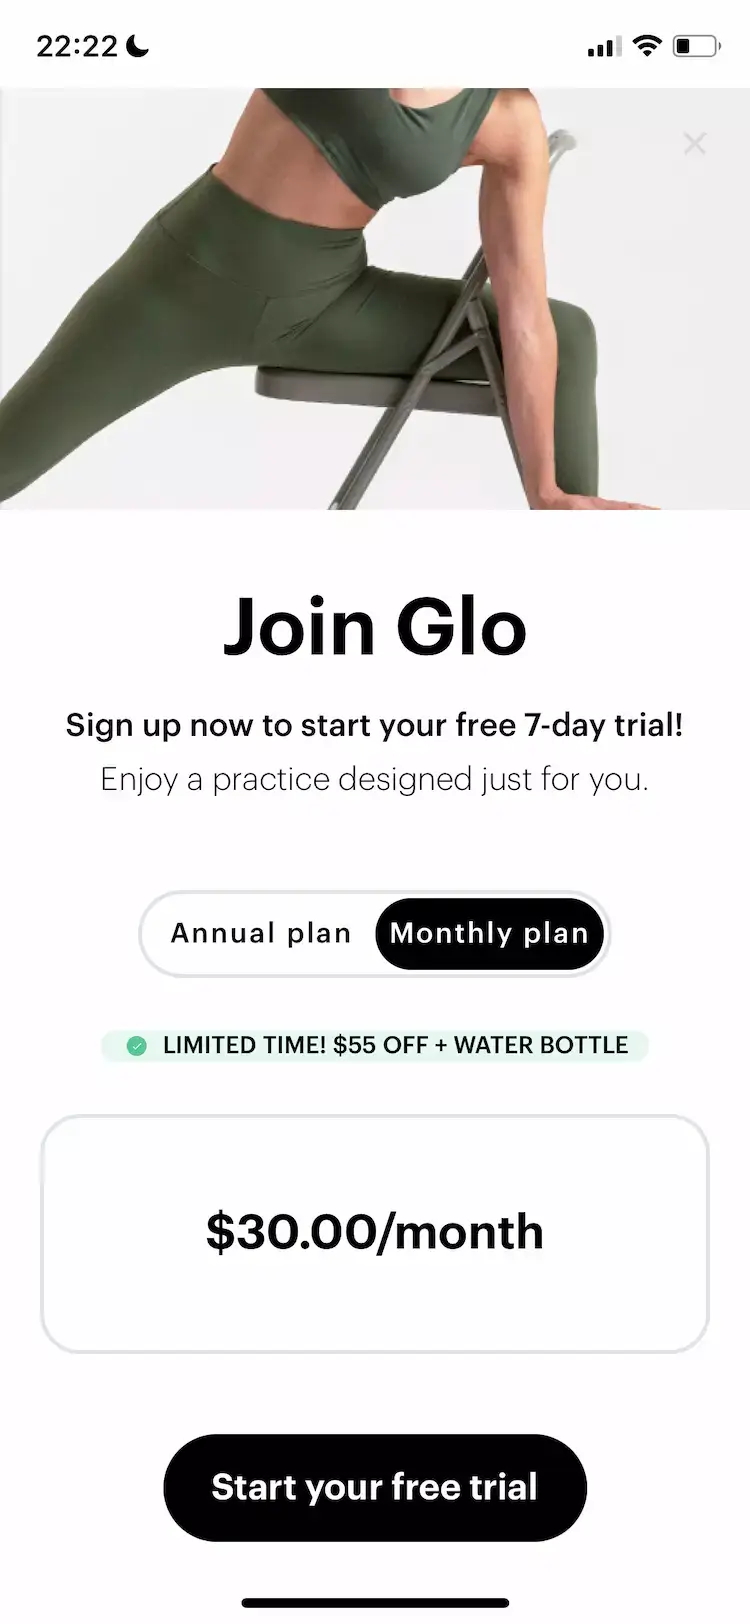 A mobile paywall design example by Glo | Yoga and Meditation App from the Health & Fitness category — monthly plan